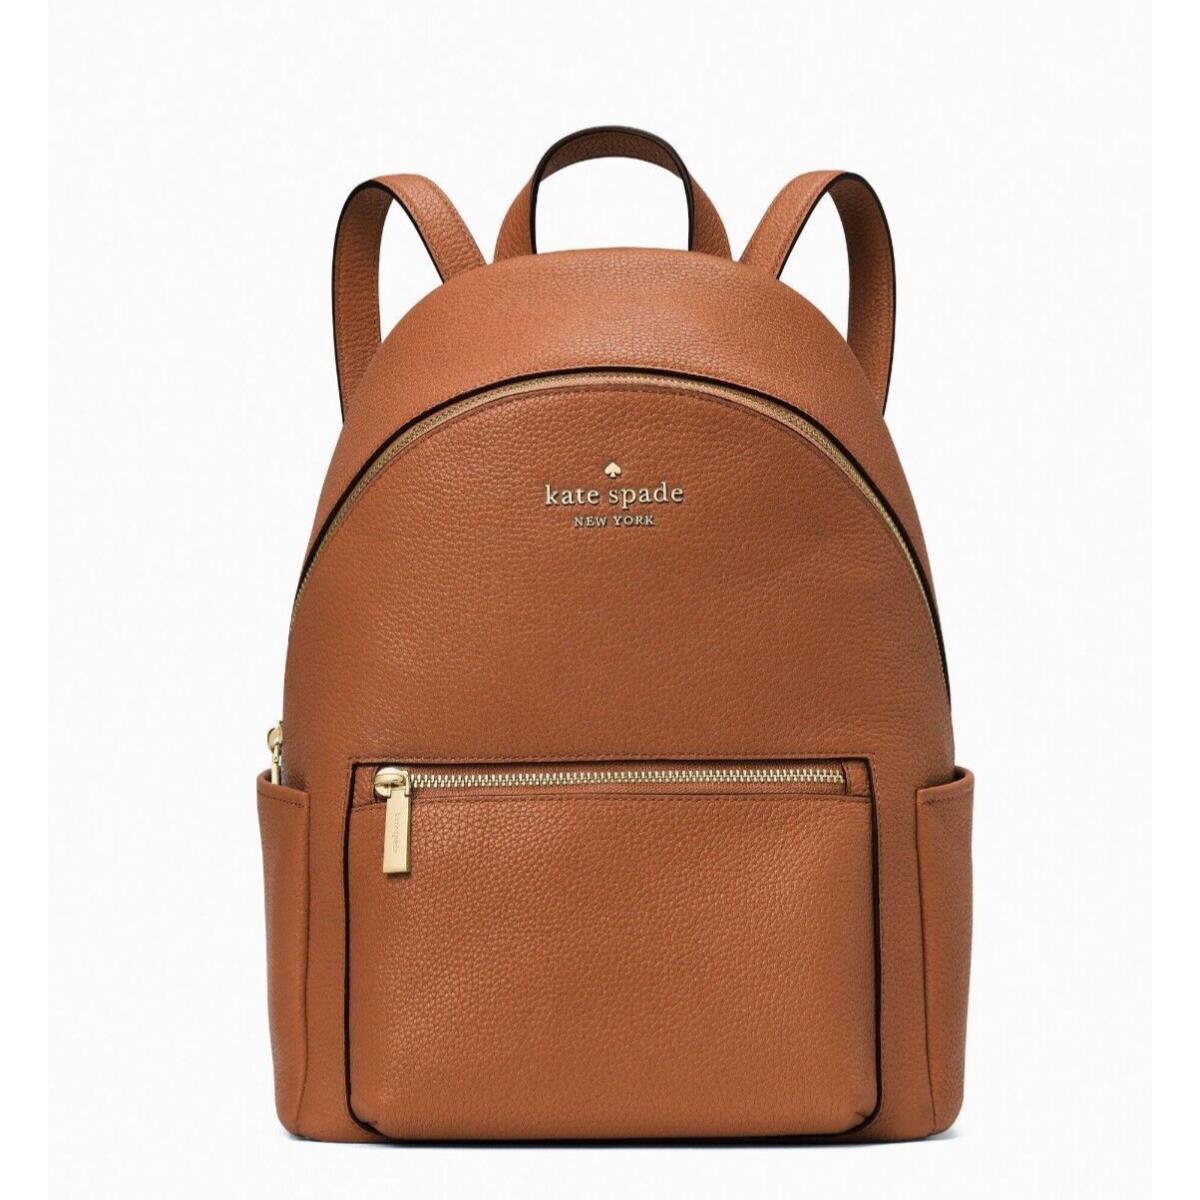 New Kate Spade Leila Medium Dome Backpack Leather Warm Gingerbread